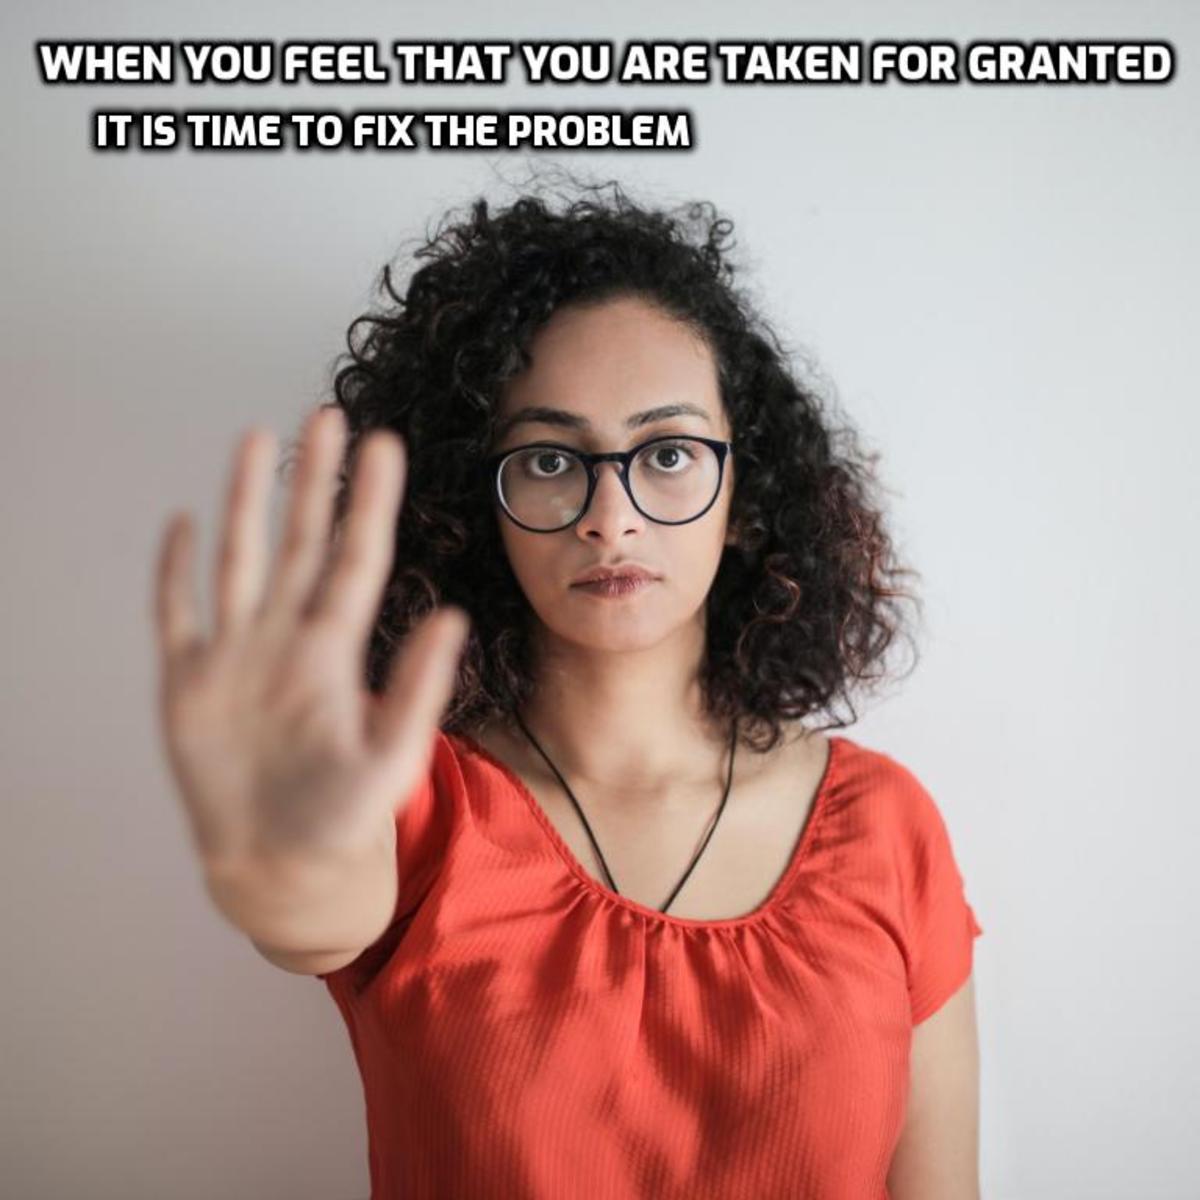 When you feel that you are taken for granted.